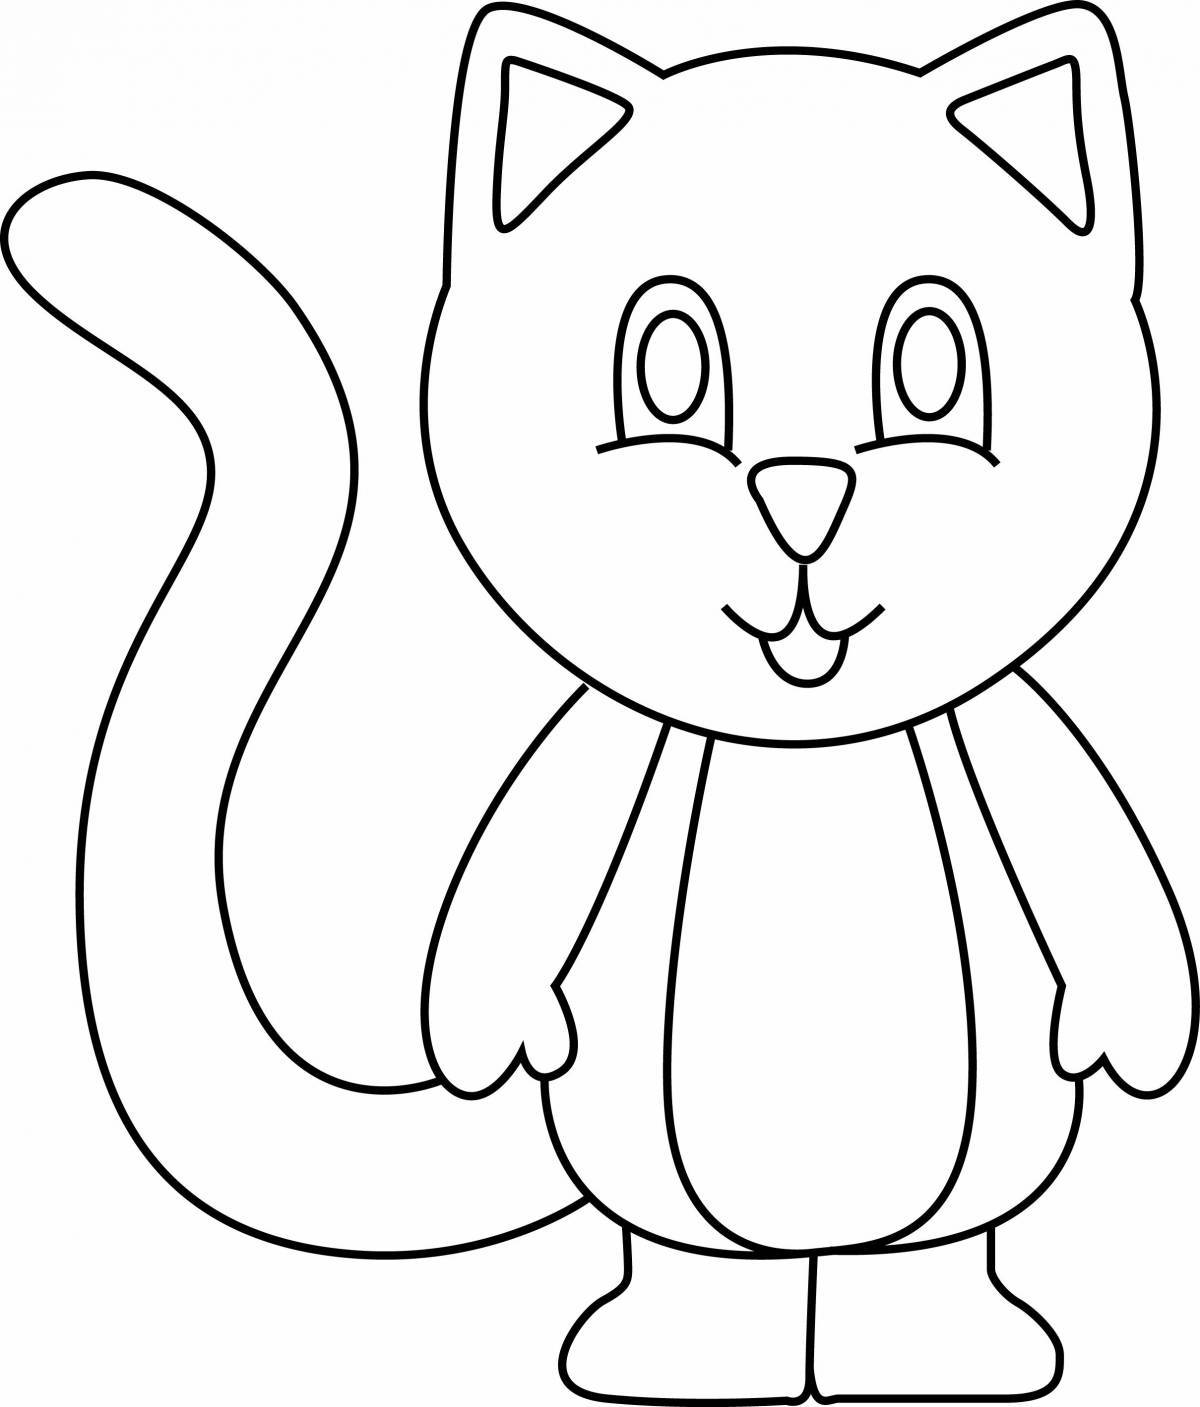 Crazy cat coloring book for kids 3-4 years old